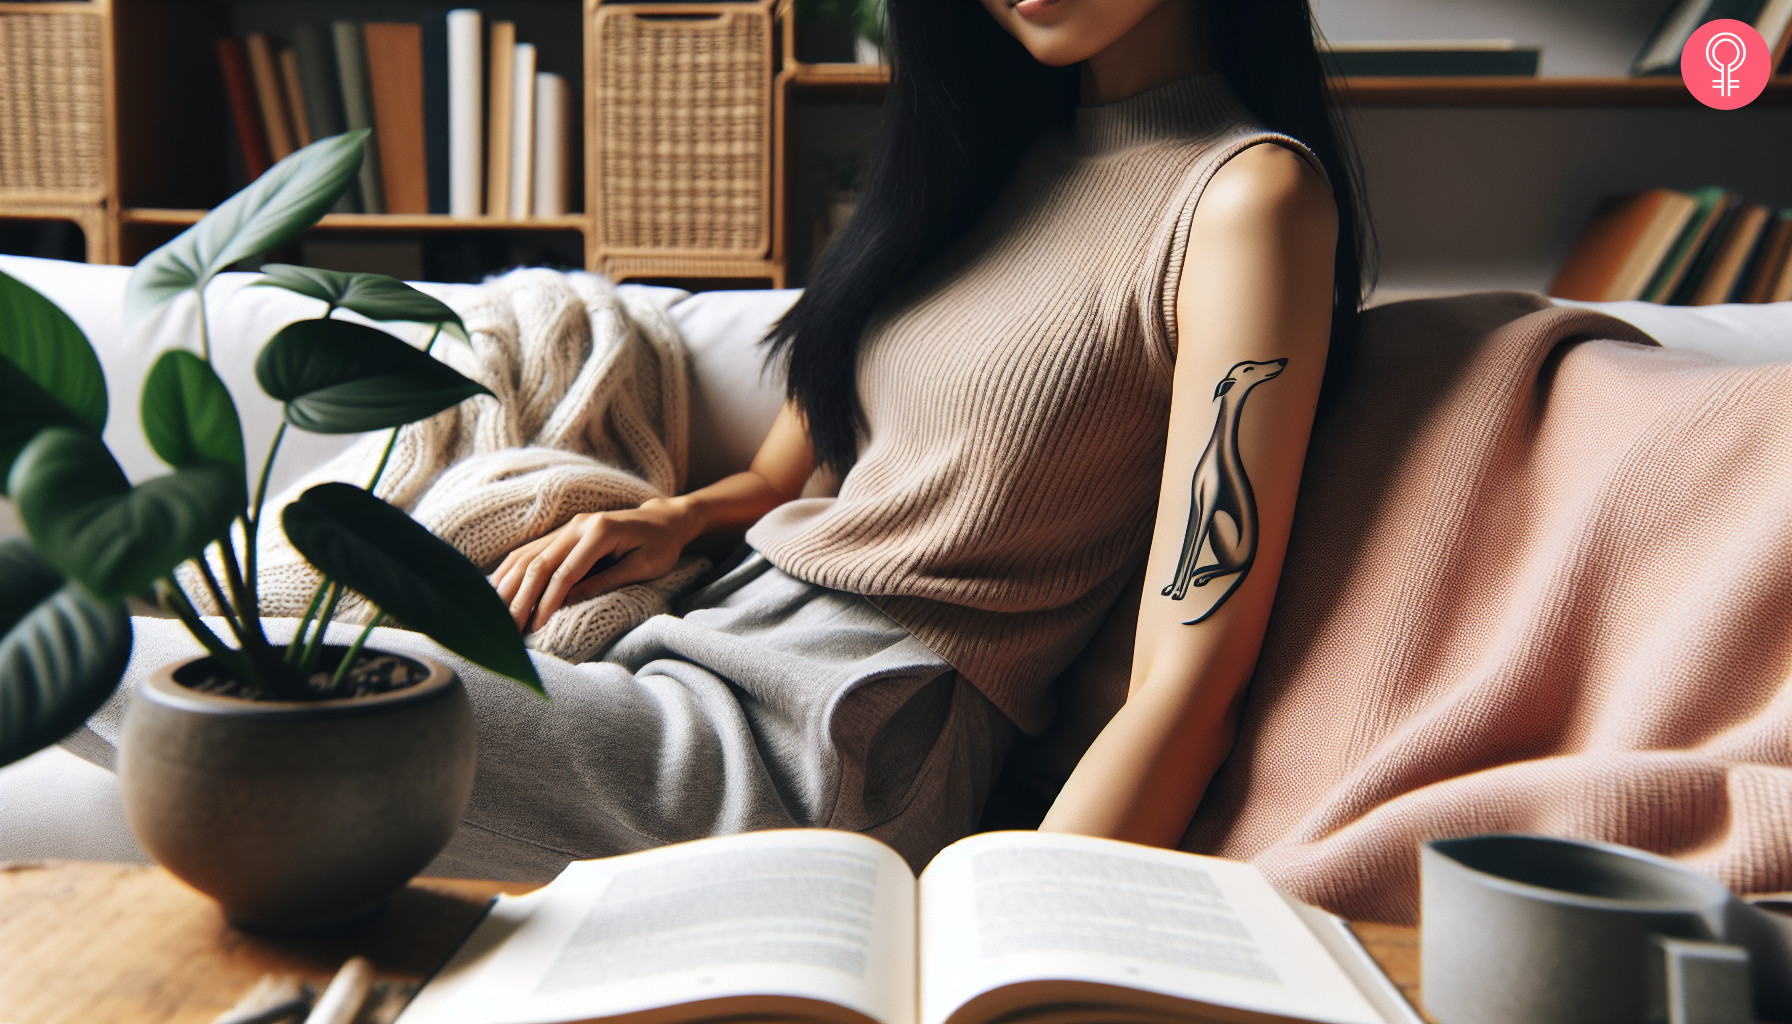 A greyhound outline tattoo on the arm of a woman